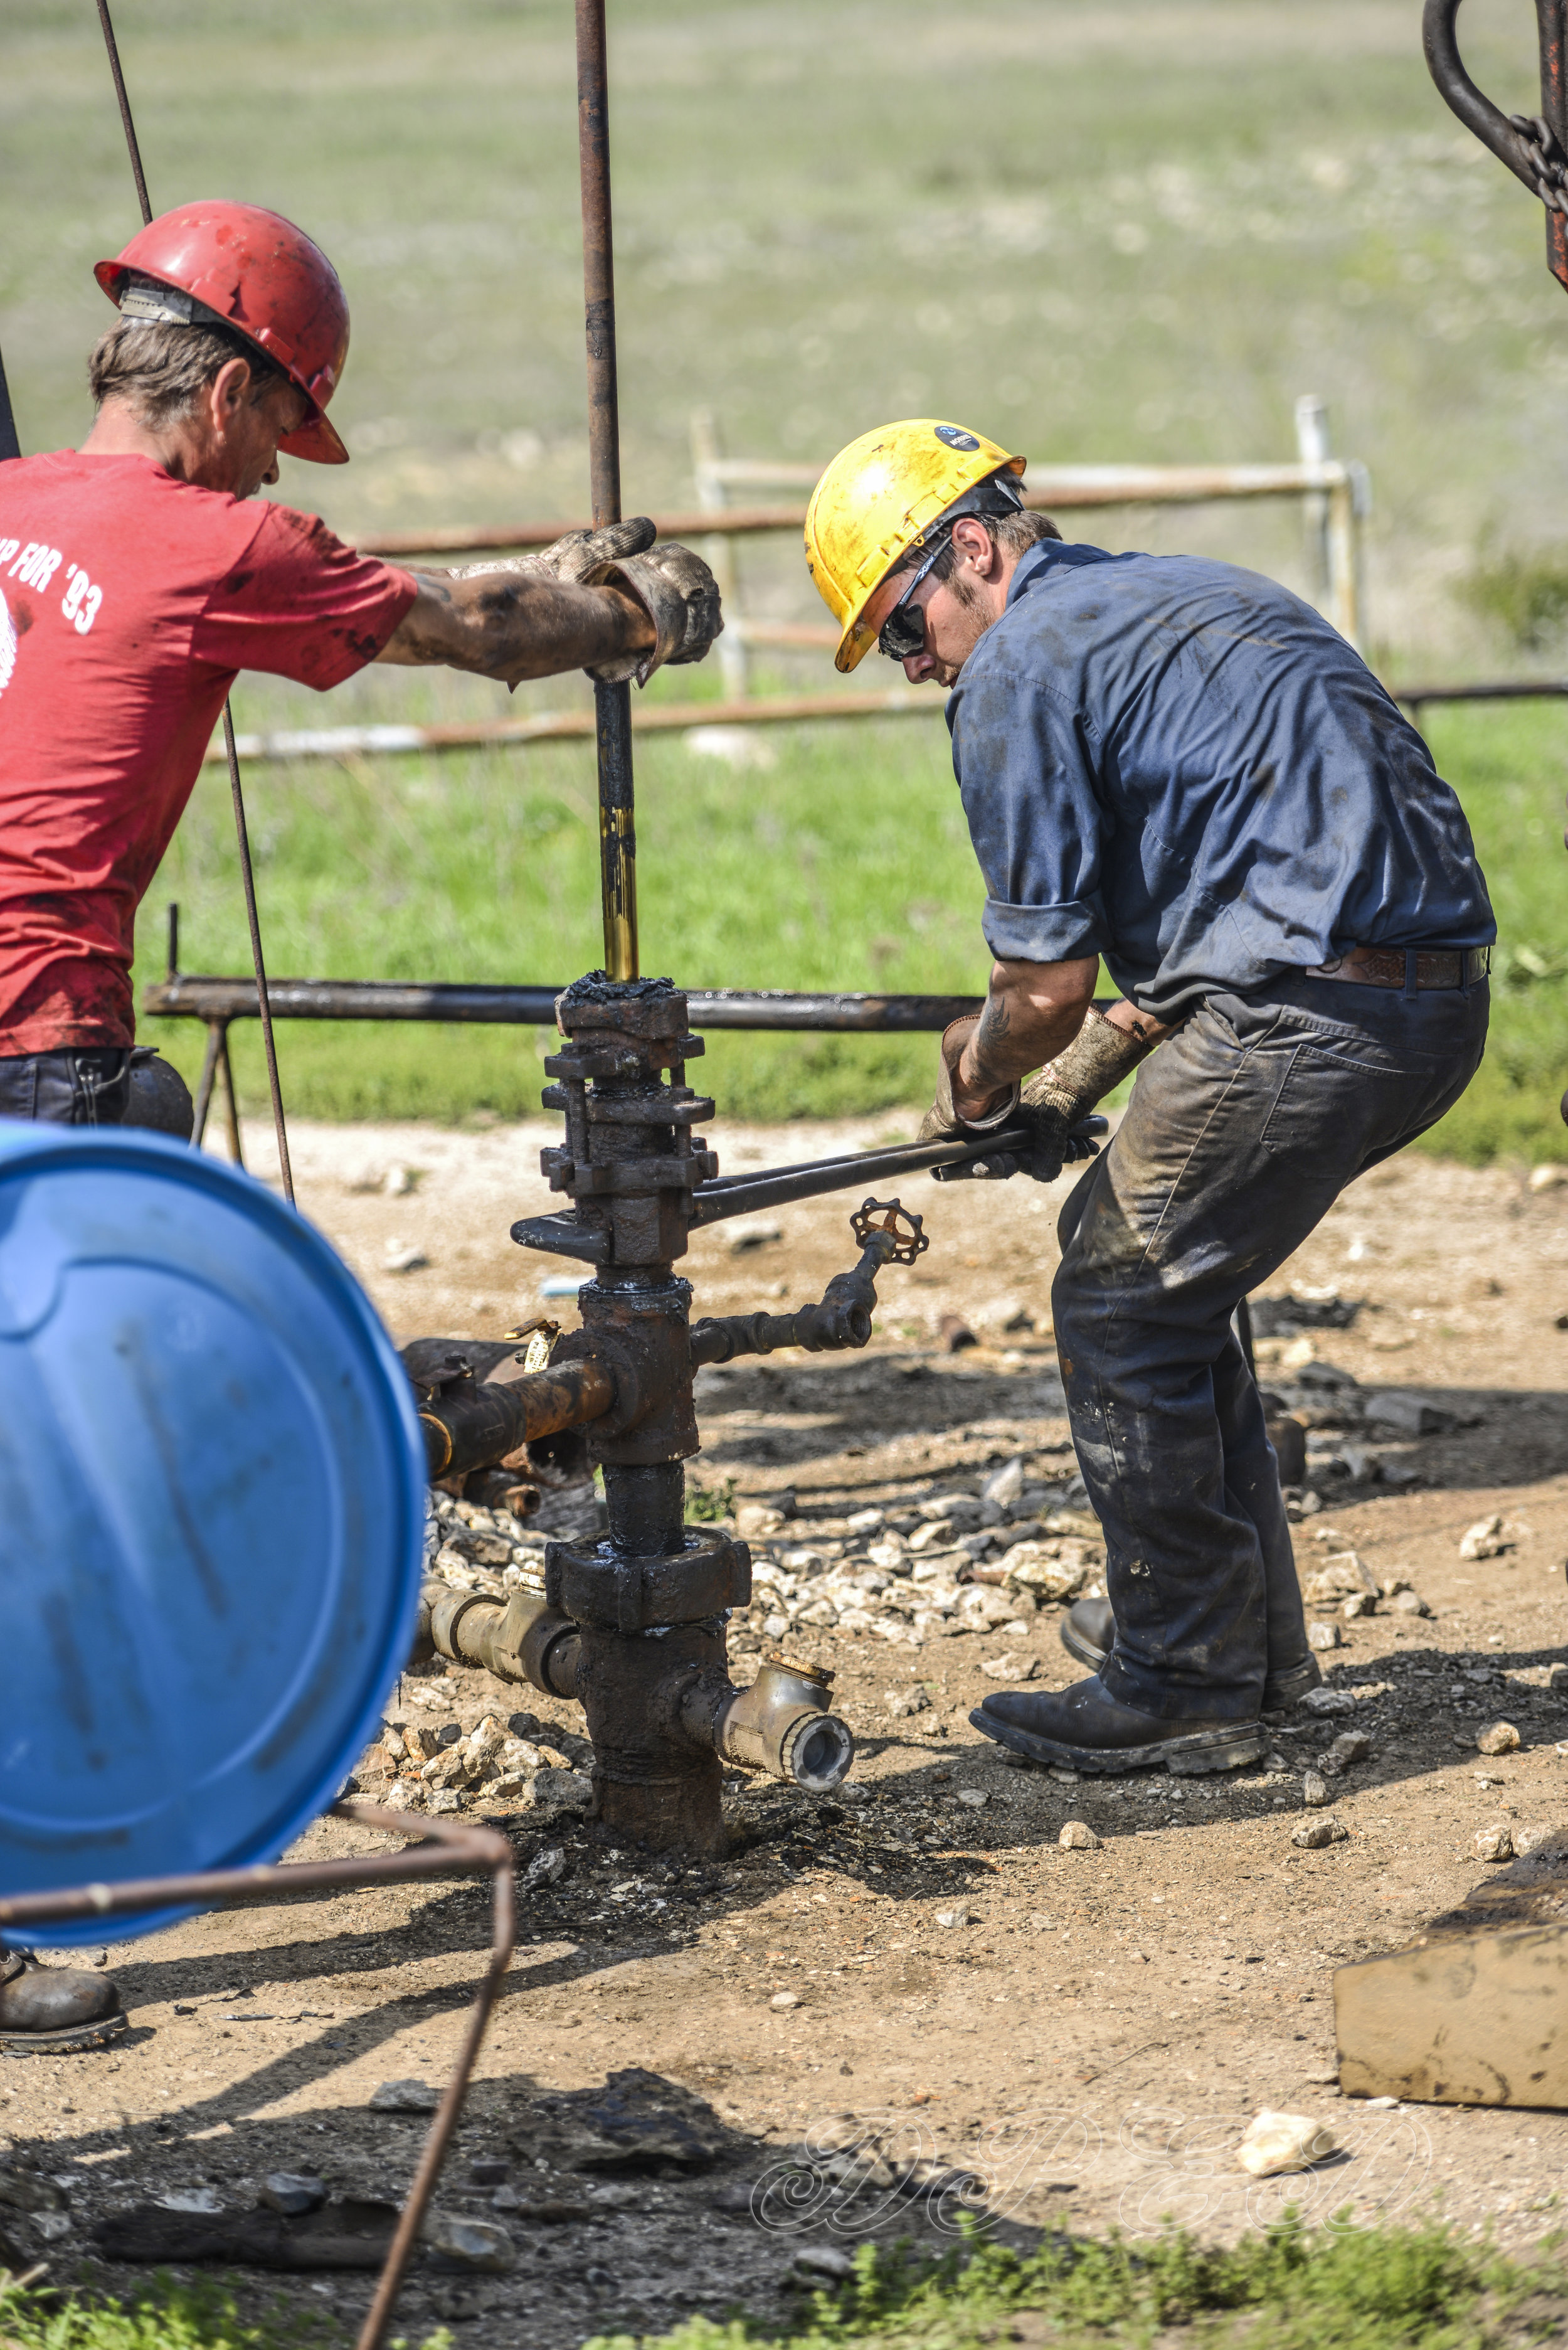 May 7, 2013 - Cheever pulling Pearson water supply (Edited)(WM)(Compressed)_0055.jpg